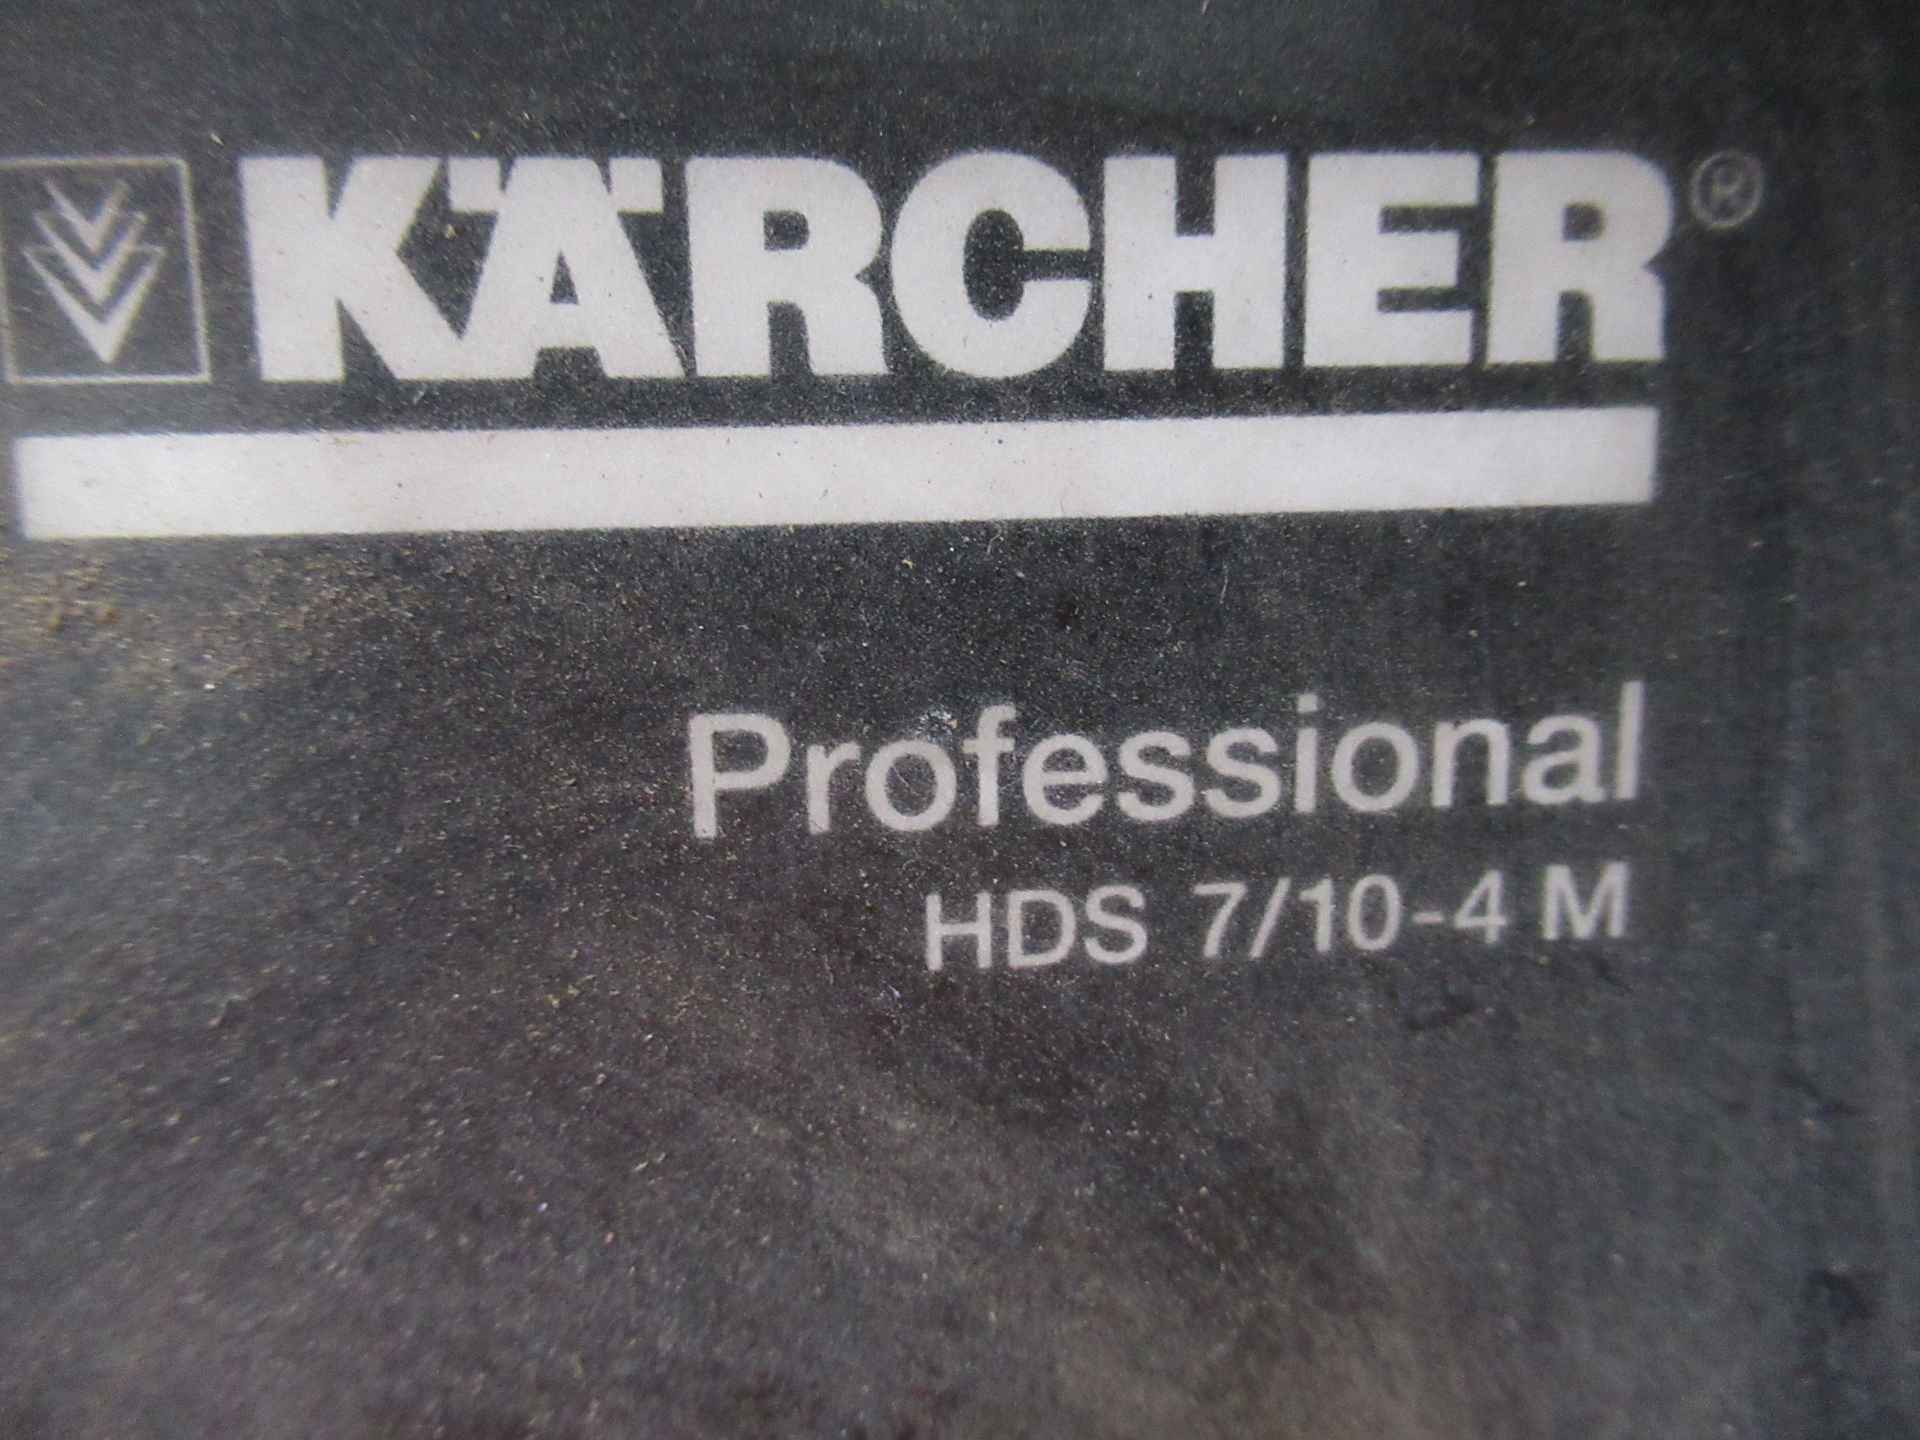 K"A"RCHER Professional HDS 7/10-4 M mobile diesel fired pressure washer/steam cleaner - Image 3 of 6